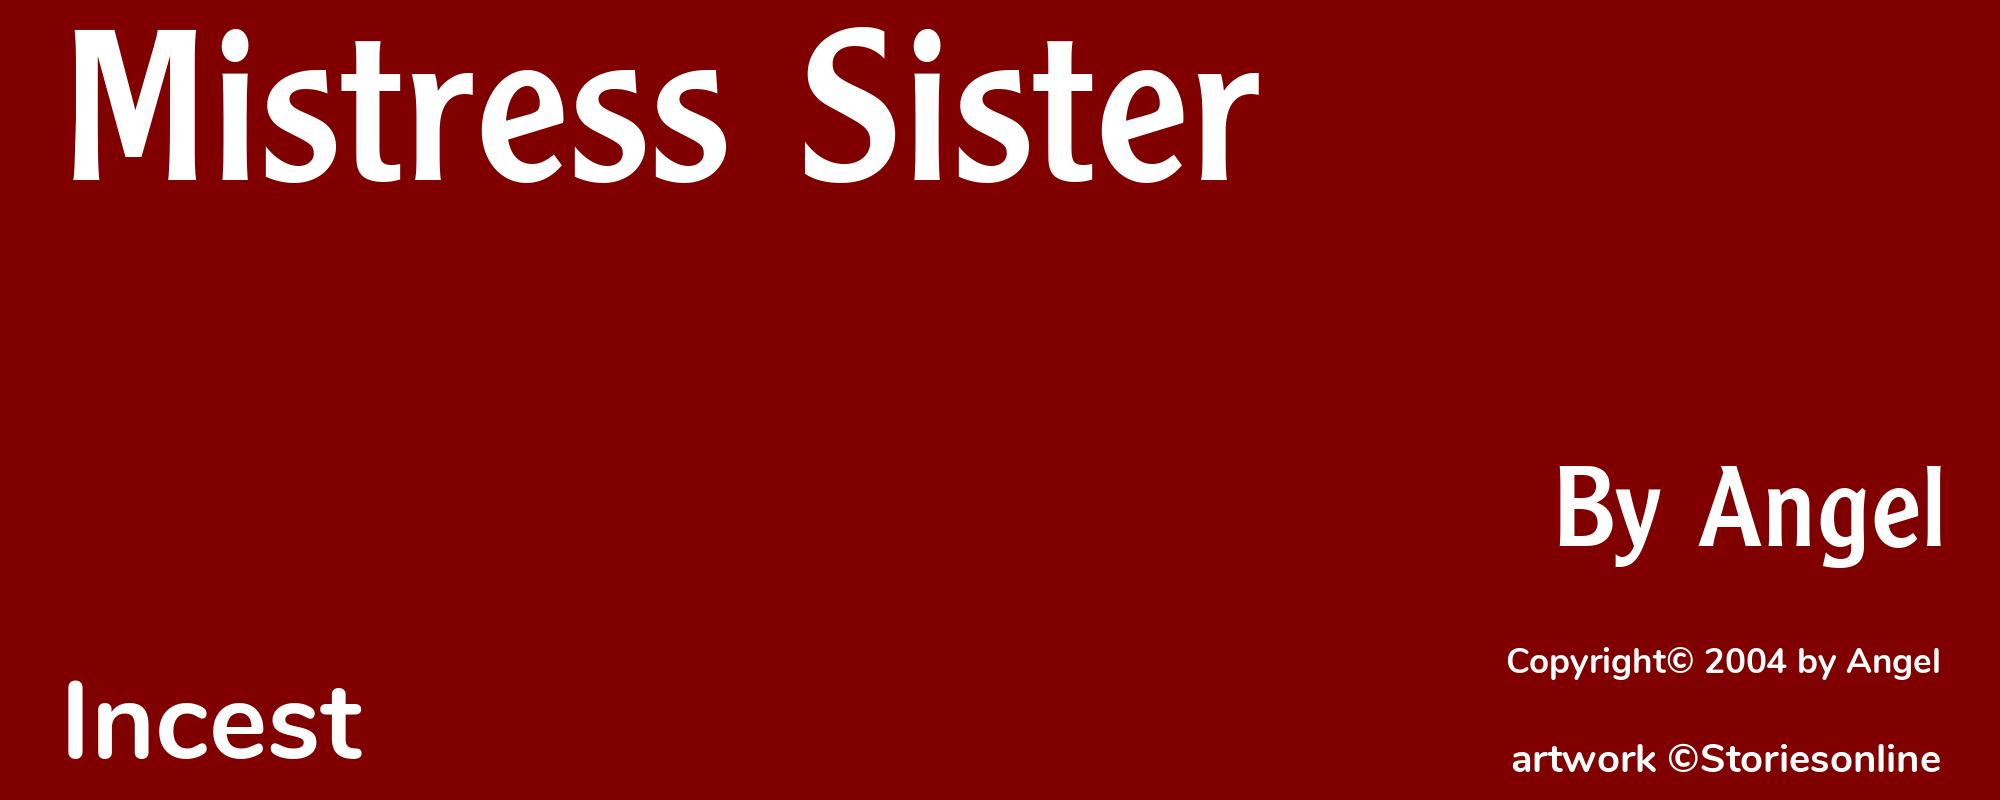 Mistress Sister - Cover